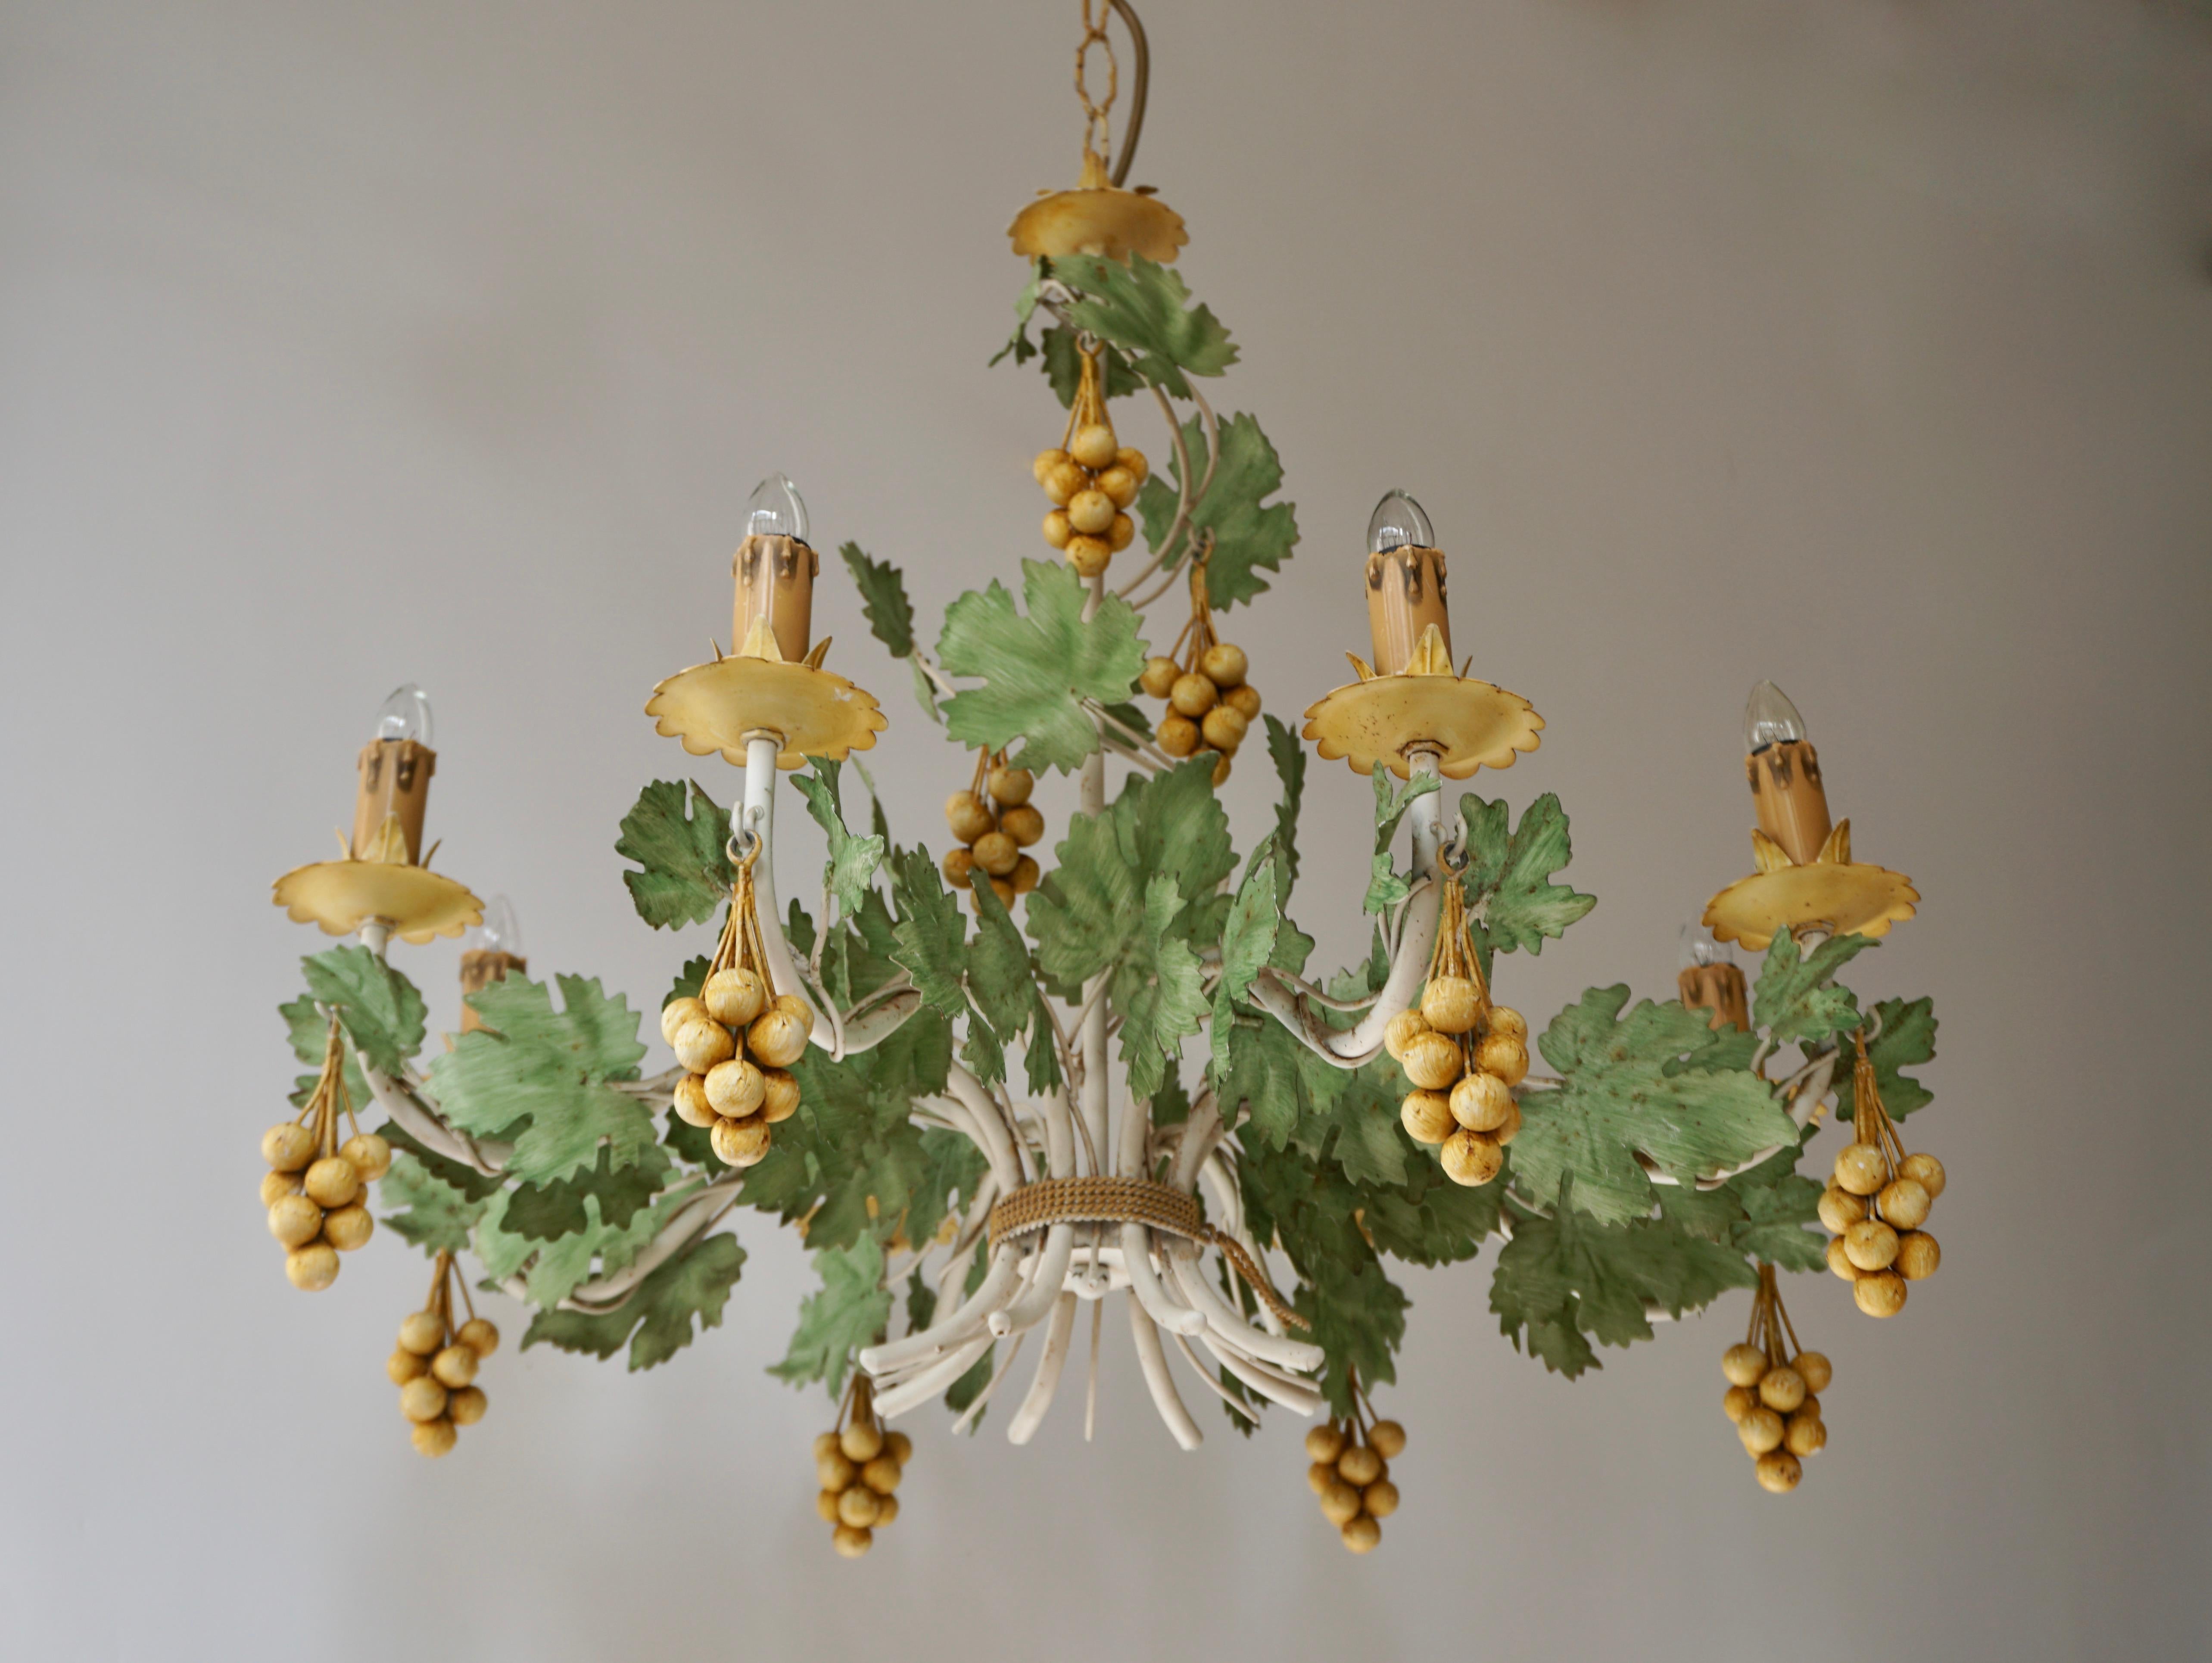 Eight-light French chandelier with yellow grapes throughout.
Painted metal frame.
Measures: Diameter 67 cm.
Height fixture 55 cm.
Total height including the chain and canopy 110 cm.